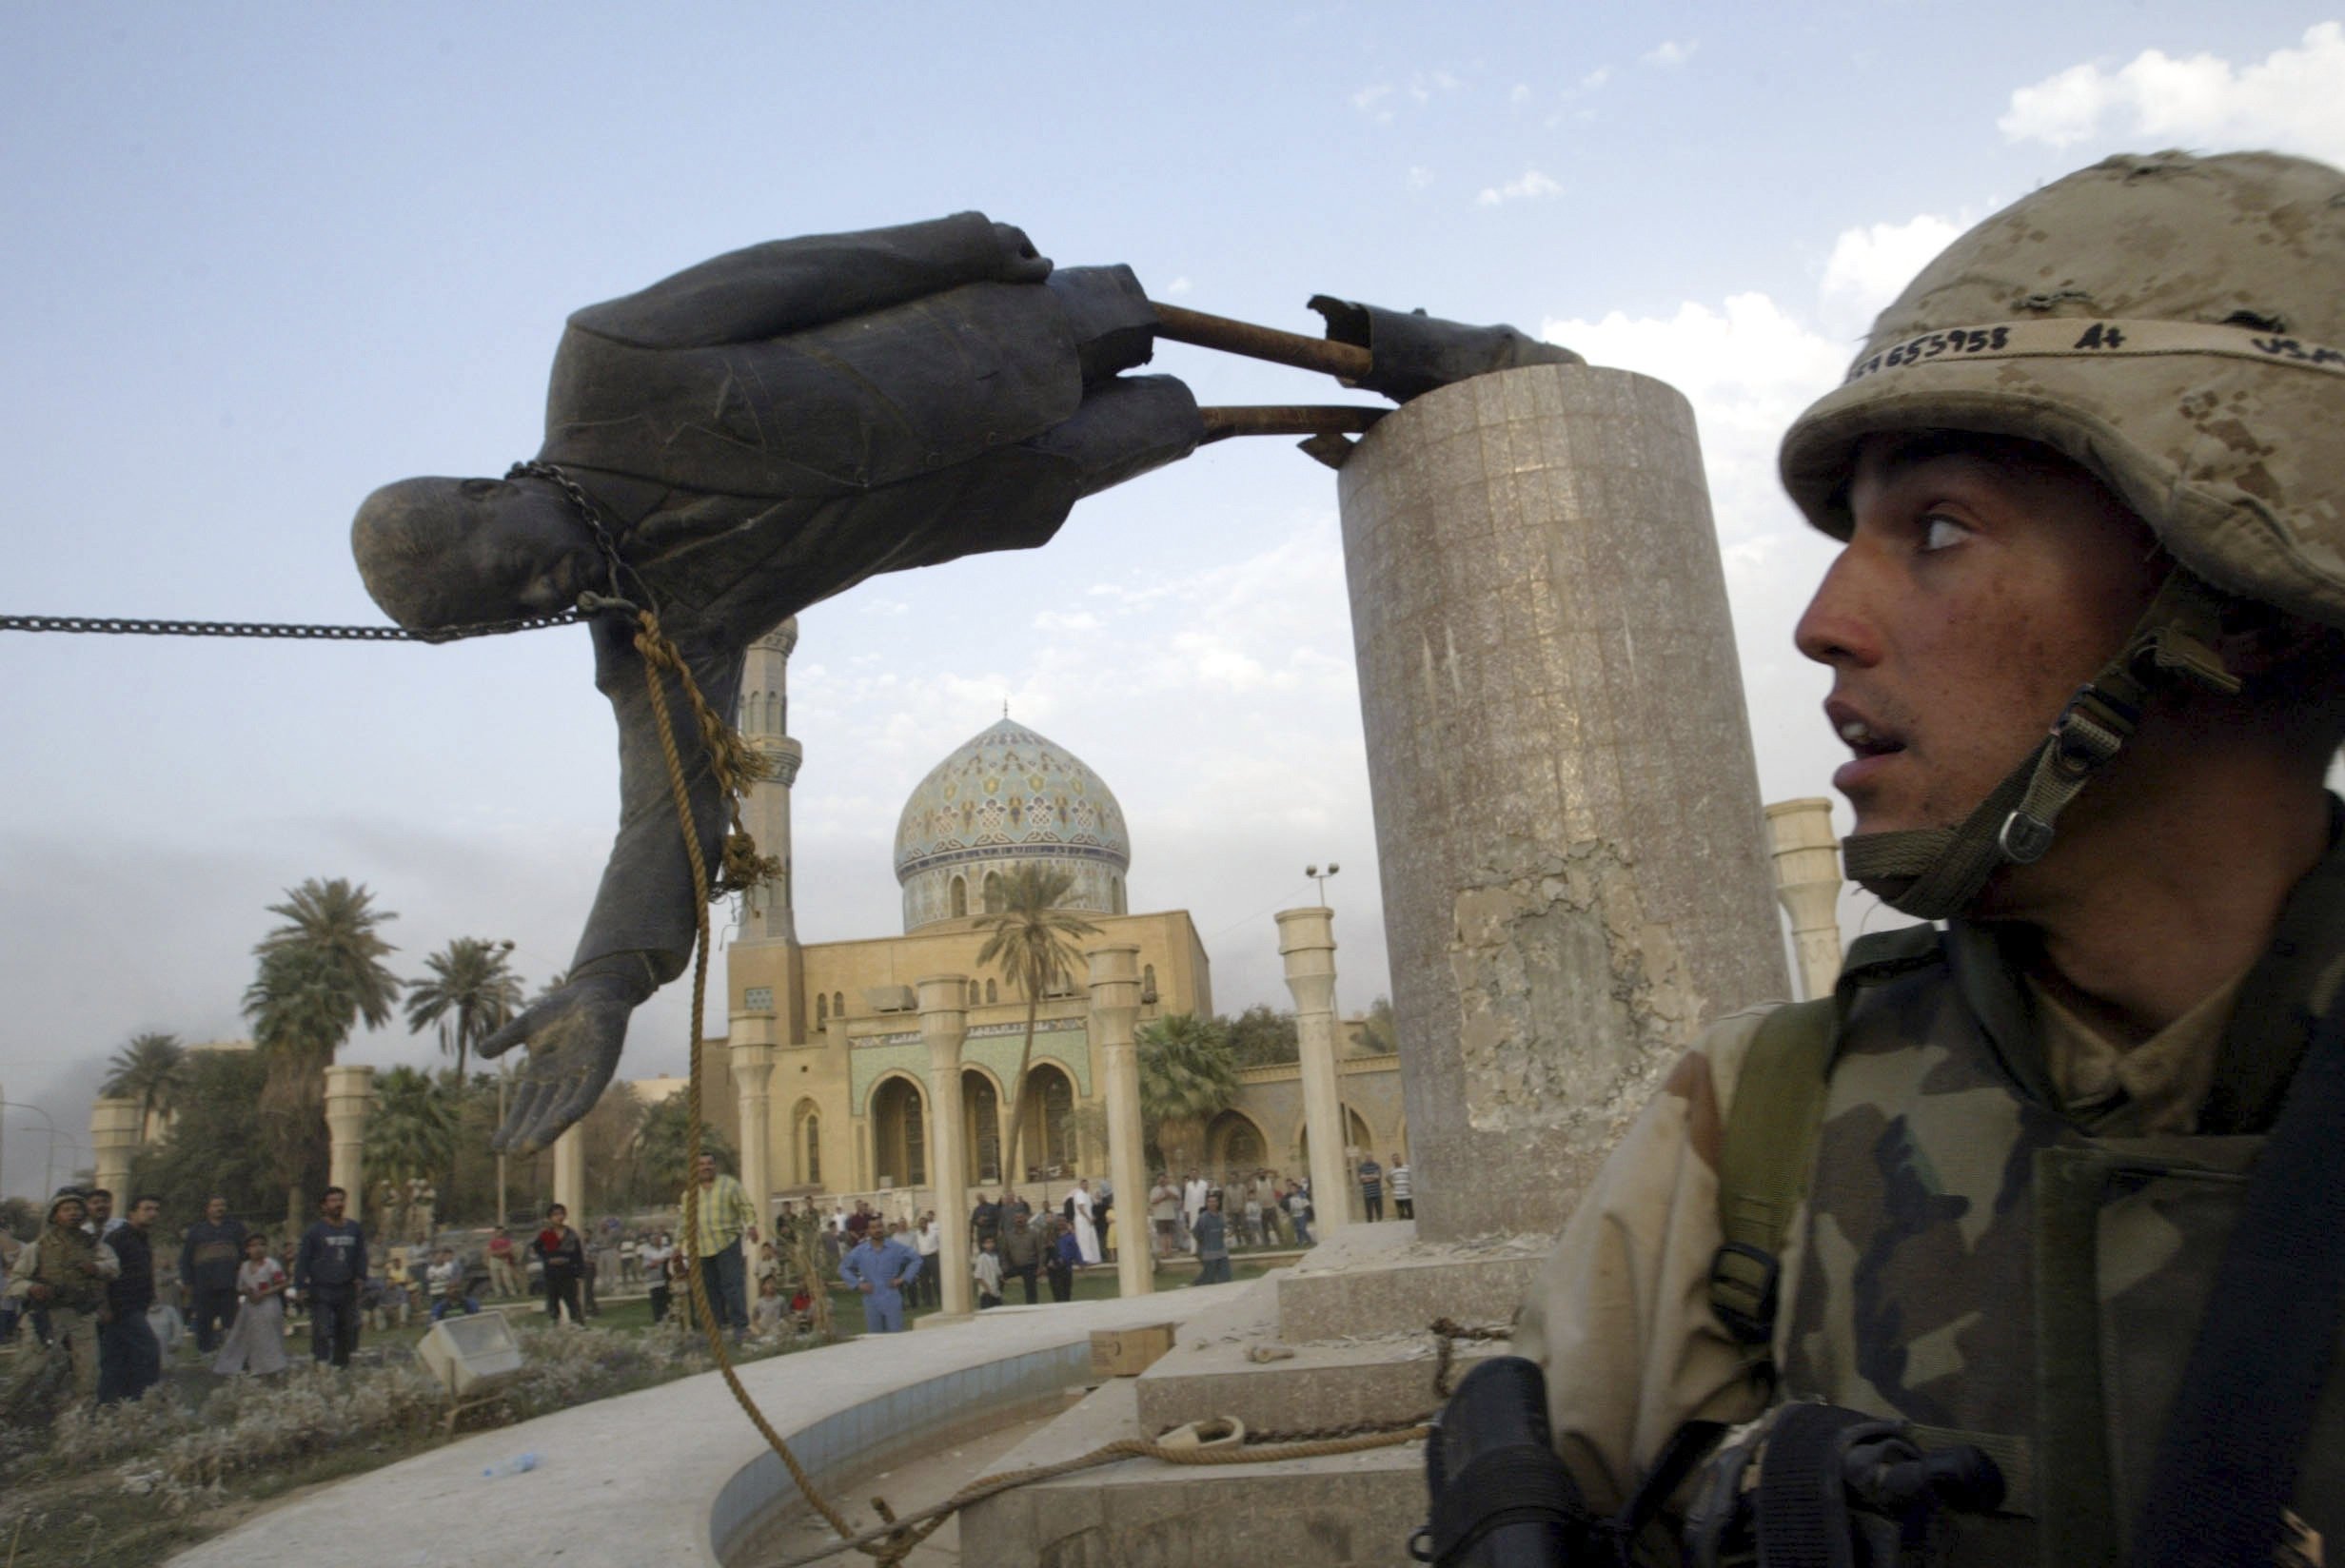 About that toppling of the Saddam Hussein statue in Baghdad ...